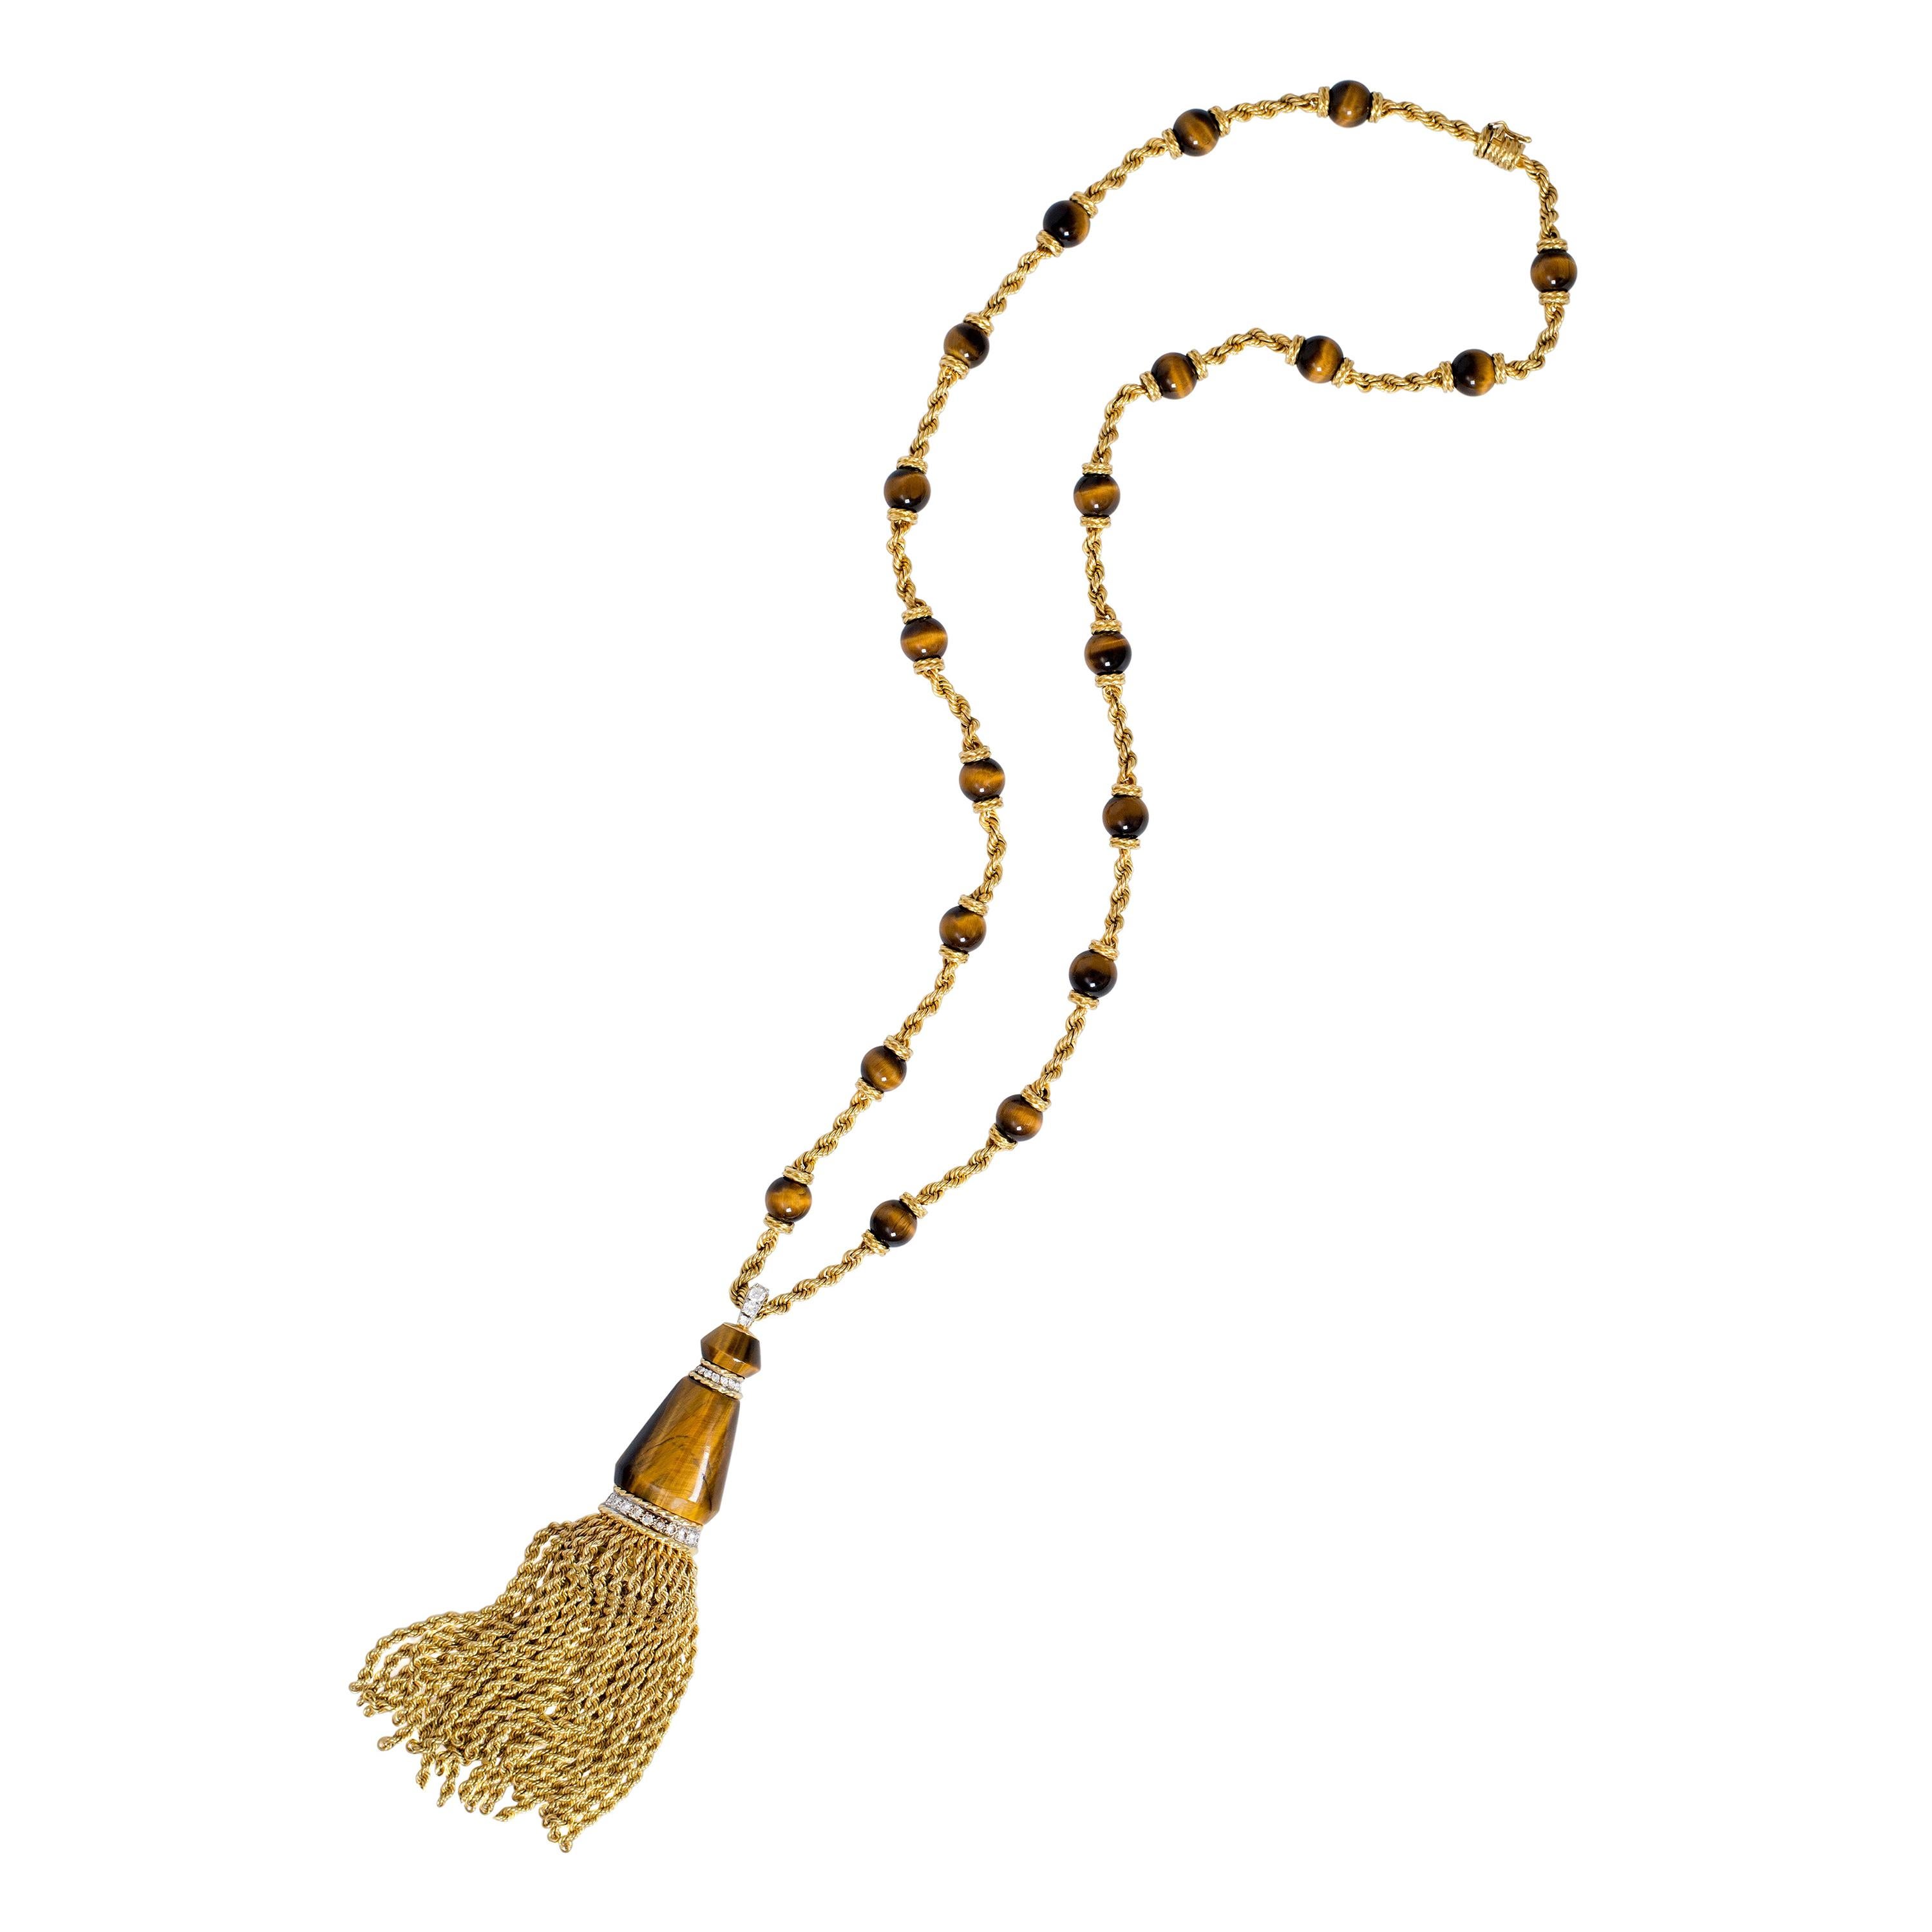 A tiger's eye, diamond and 18 karat gold braided tassel sautoir, by British jewelry house of Kutchinsky, 1971.  

The pendant is signed Kutchinsky, stamped with maker's mark K LD, London hallmarks dated with the letter 